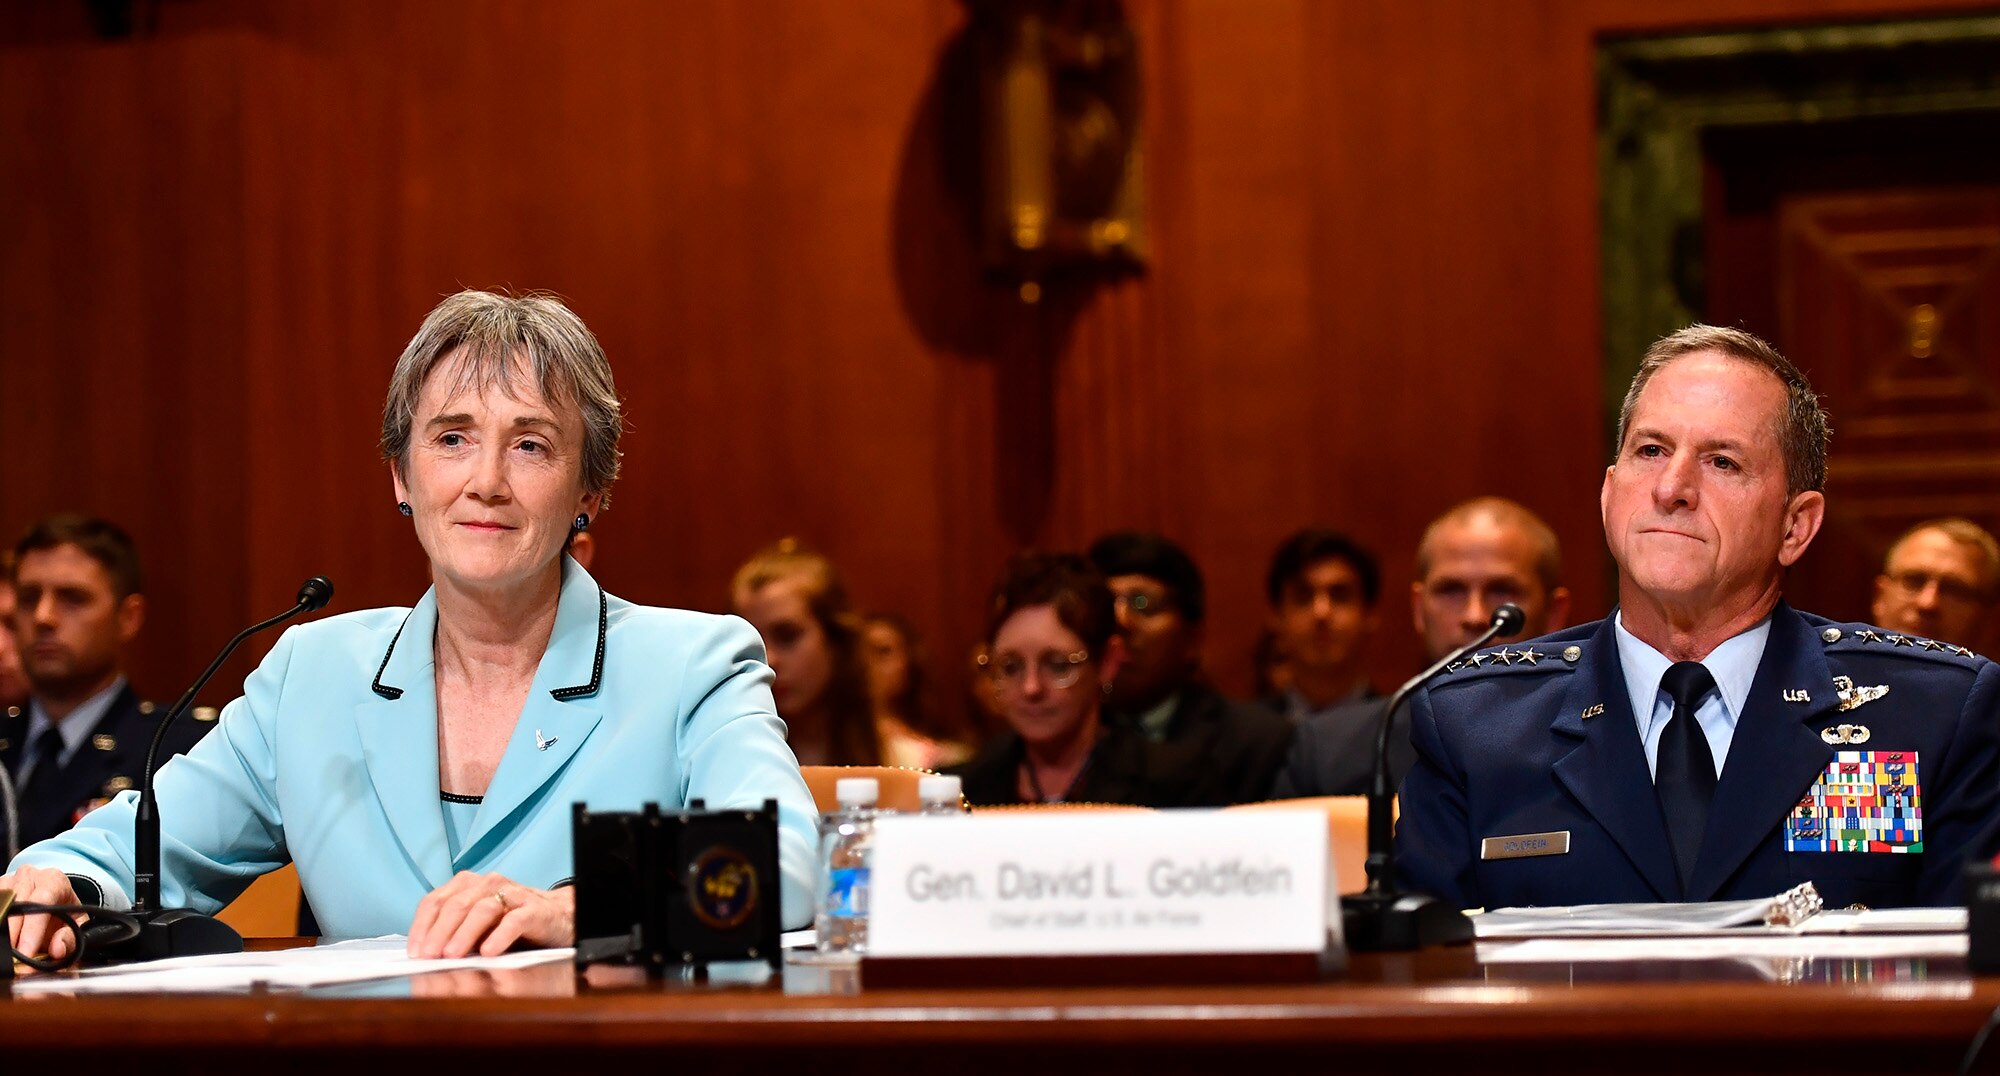 Secretary of the Air Force Heather Wilson and Air Force Chief of Staff Gen. David Goldfein testify before the Senate Appropriations Committee for Defense June 21, 2017, in Washington, D.C.  The subcommittee hearing was held to discuss the fiscal year 2018 budget request for the Air Force. (U.S. Air Force photo/Scott M. Ash)